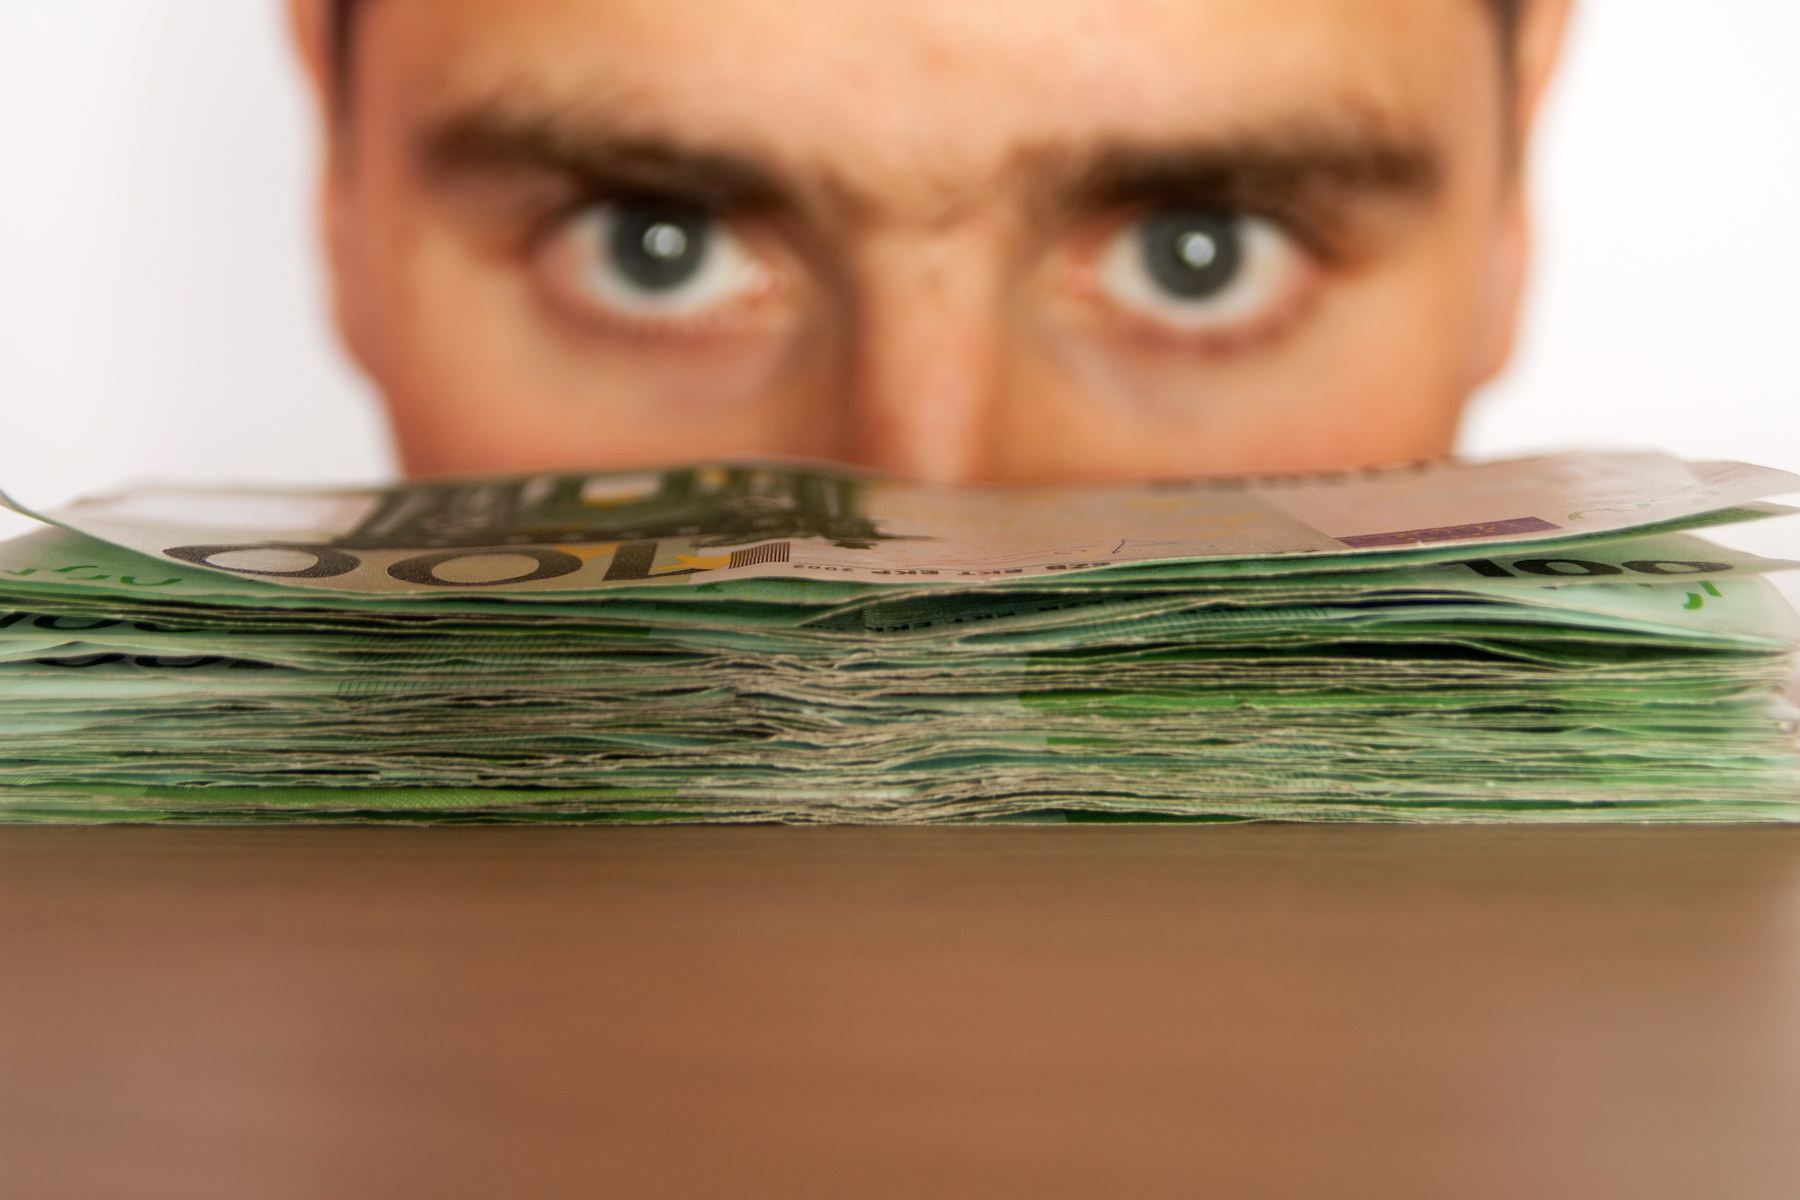 A close-up of a person's eyes peering over a large stack of hundred-dollar bills, conveying a sense of curiosity, scrutiny, or possibly greed.